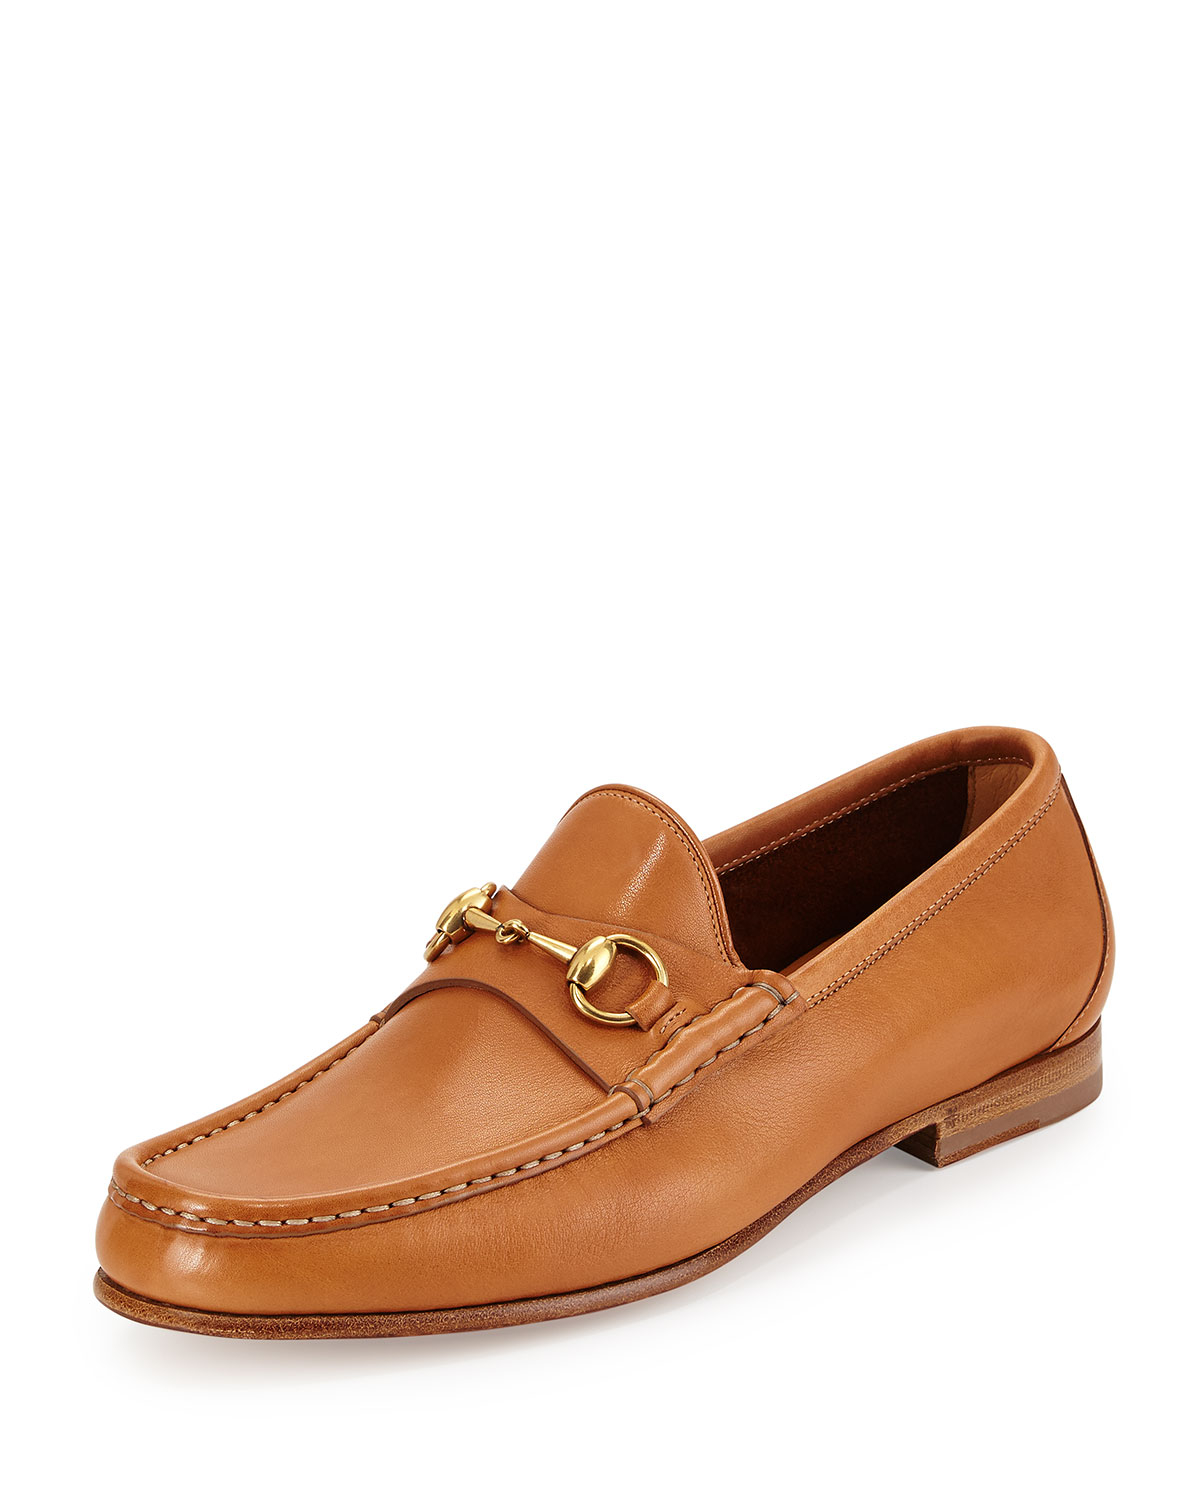 Lyst - Gucci Leather Horsebit Loafer in Brown for Men